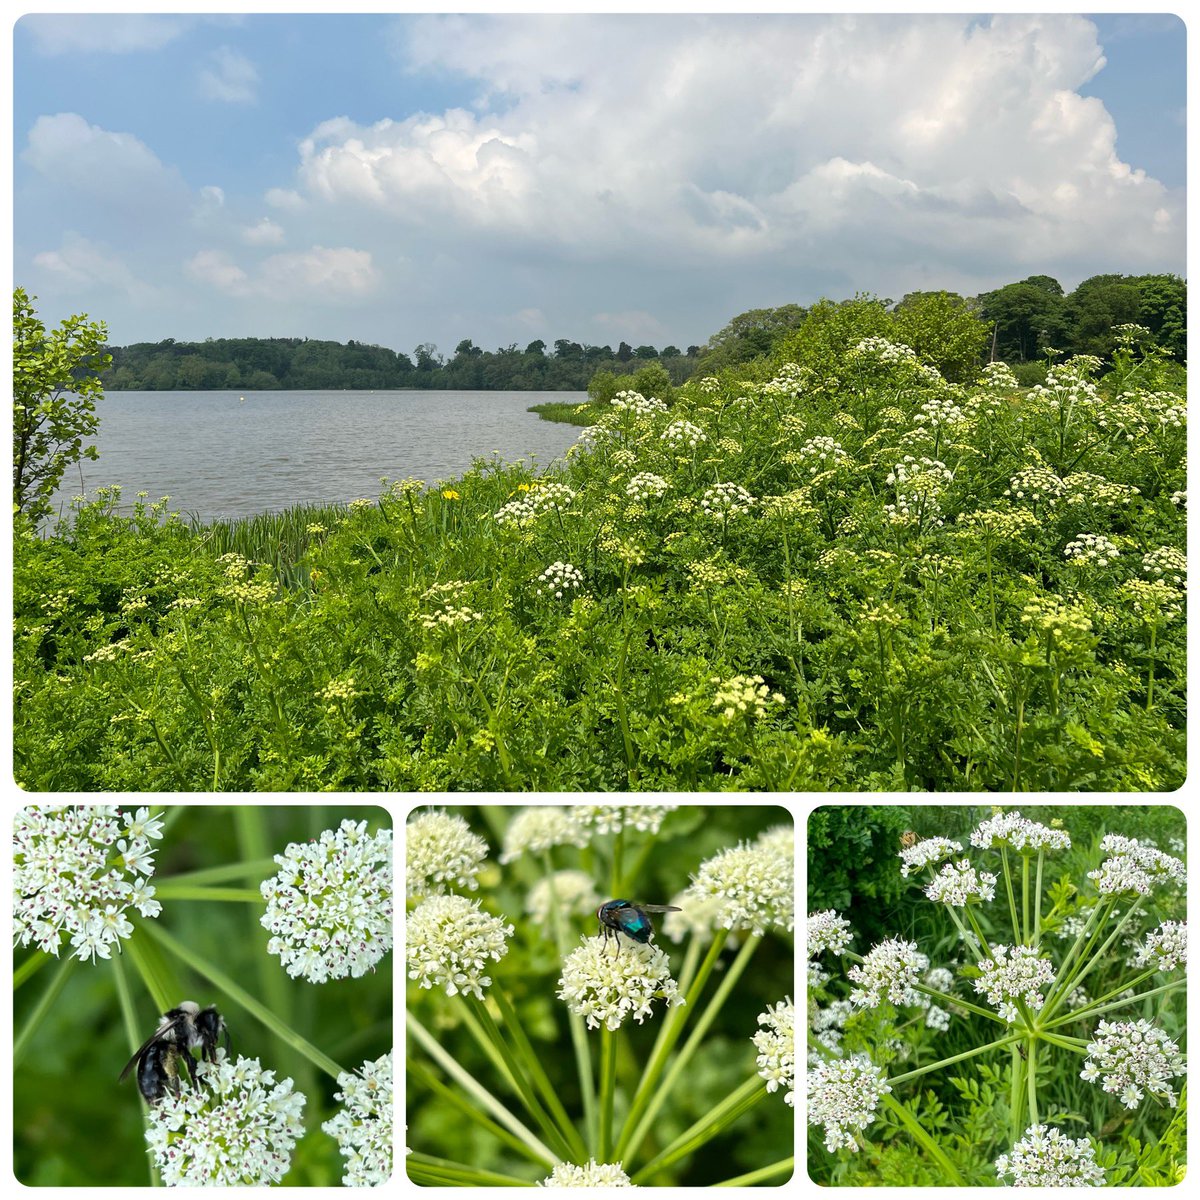 A huge stand of Hemlock Water Dropwort, Oenanthe crocata, super poisonous to us ☠️ but being enjoyed by myriads of inverts (it was absolutely humming!) I was happy to spot a snazzy little Ashy Mining Bee too, which was a first for me! #carrotsandpeas #wildflowerhour